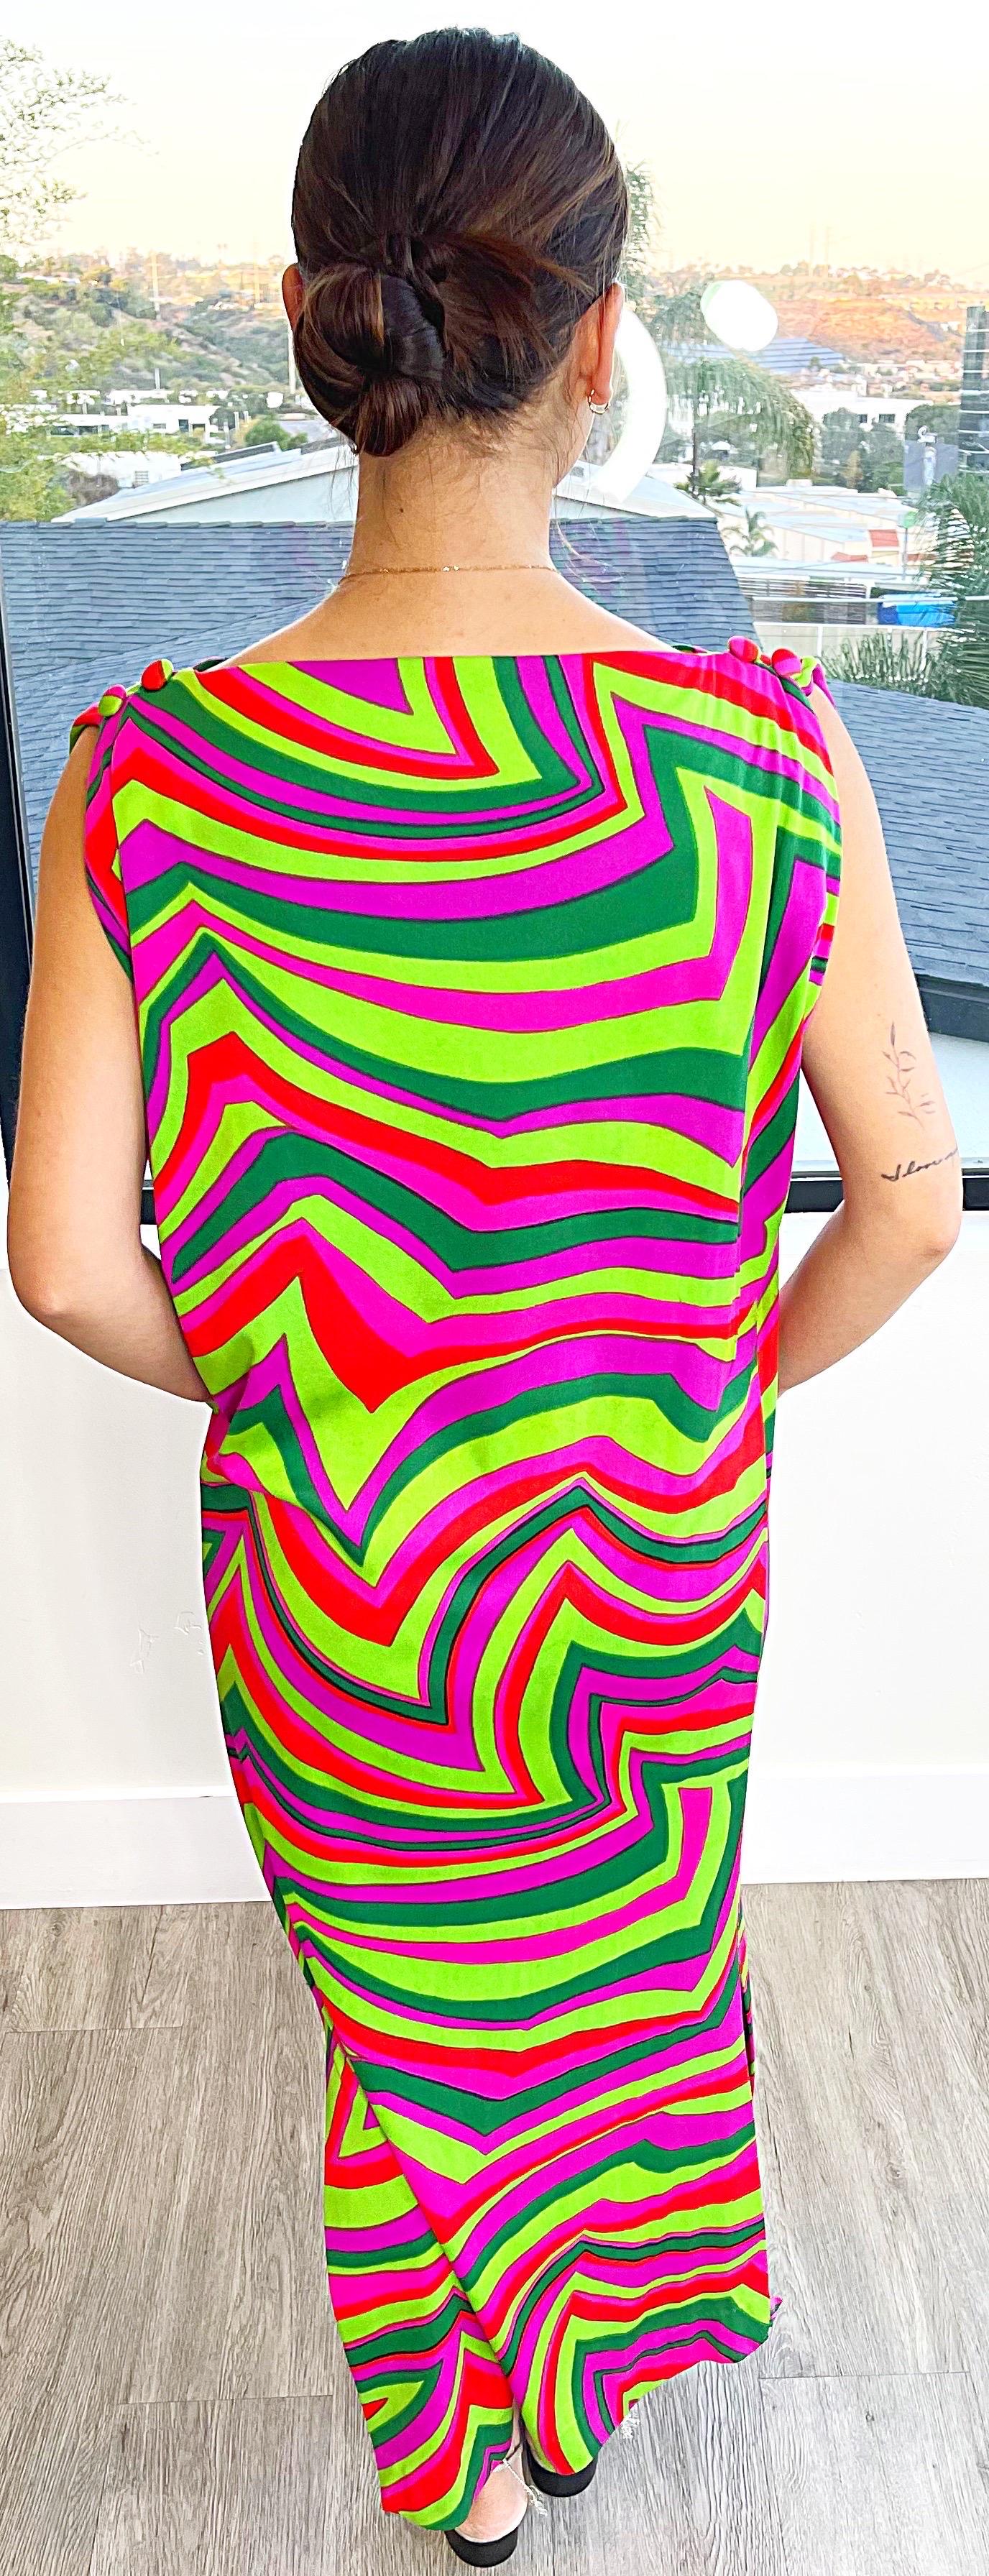 Amazing 1970s Pucci Style Colorful Pink Green Jersey Vintage Caftan Maxi Dress For Sale 4